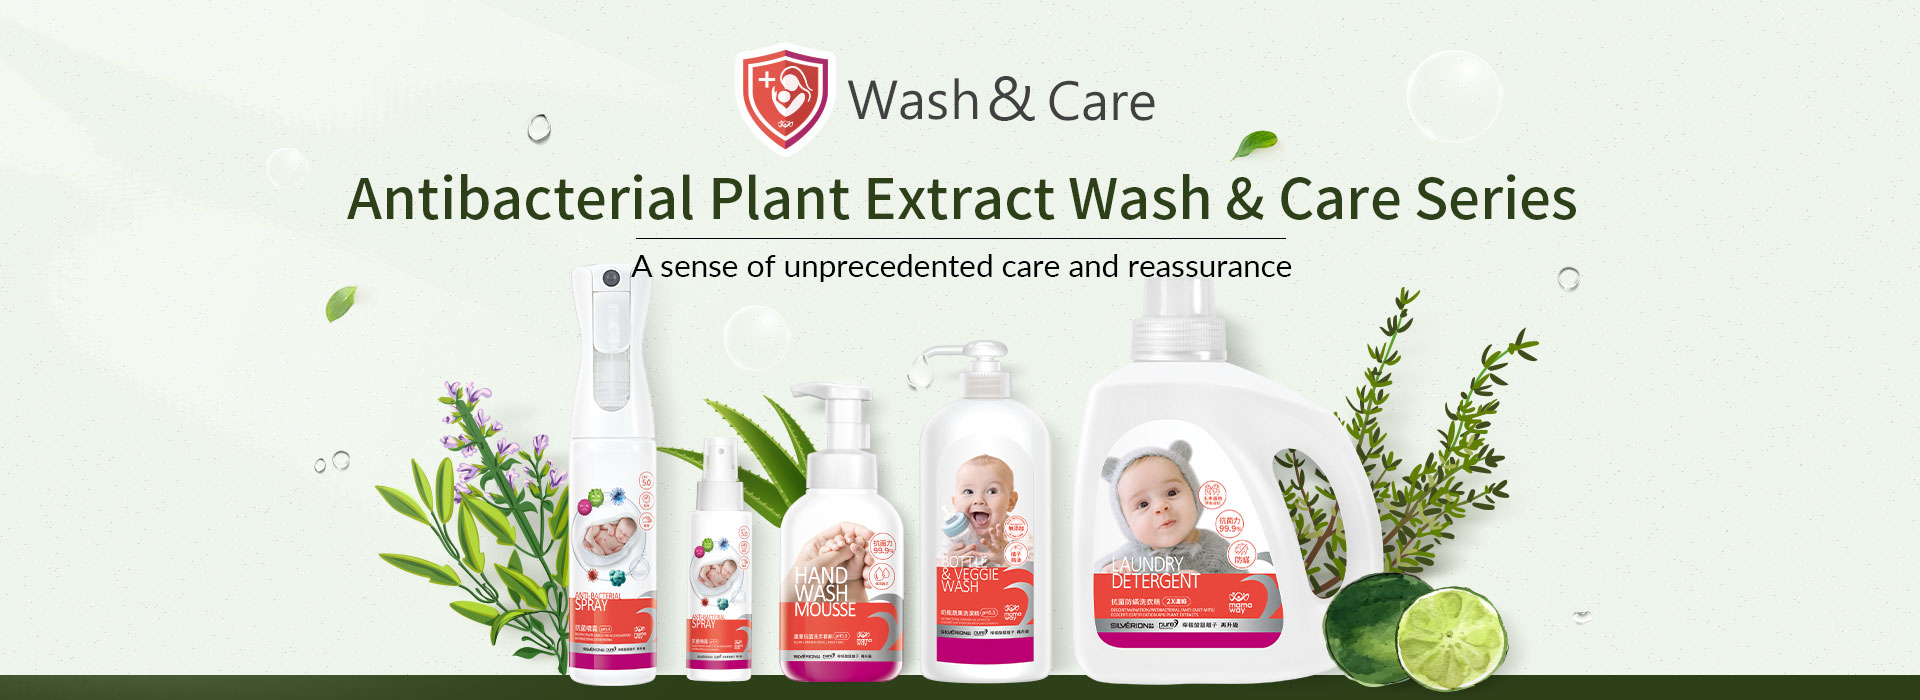 Antibacterial Plant Extract Wash & Care Series